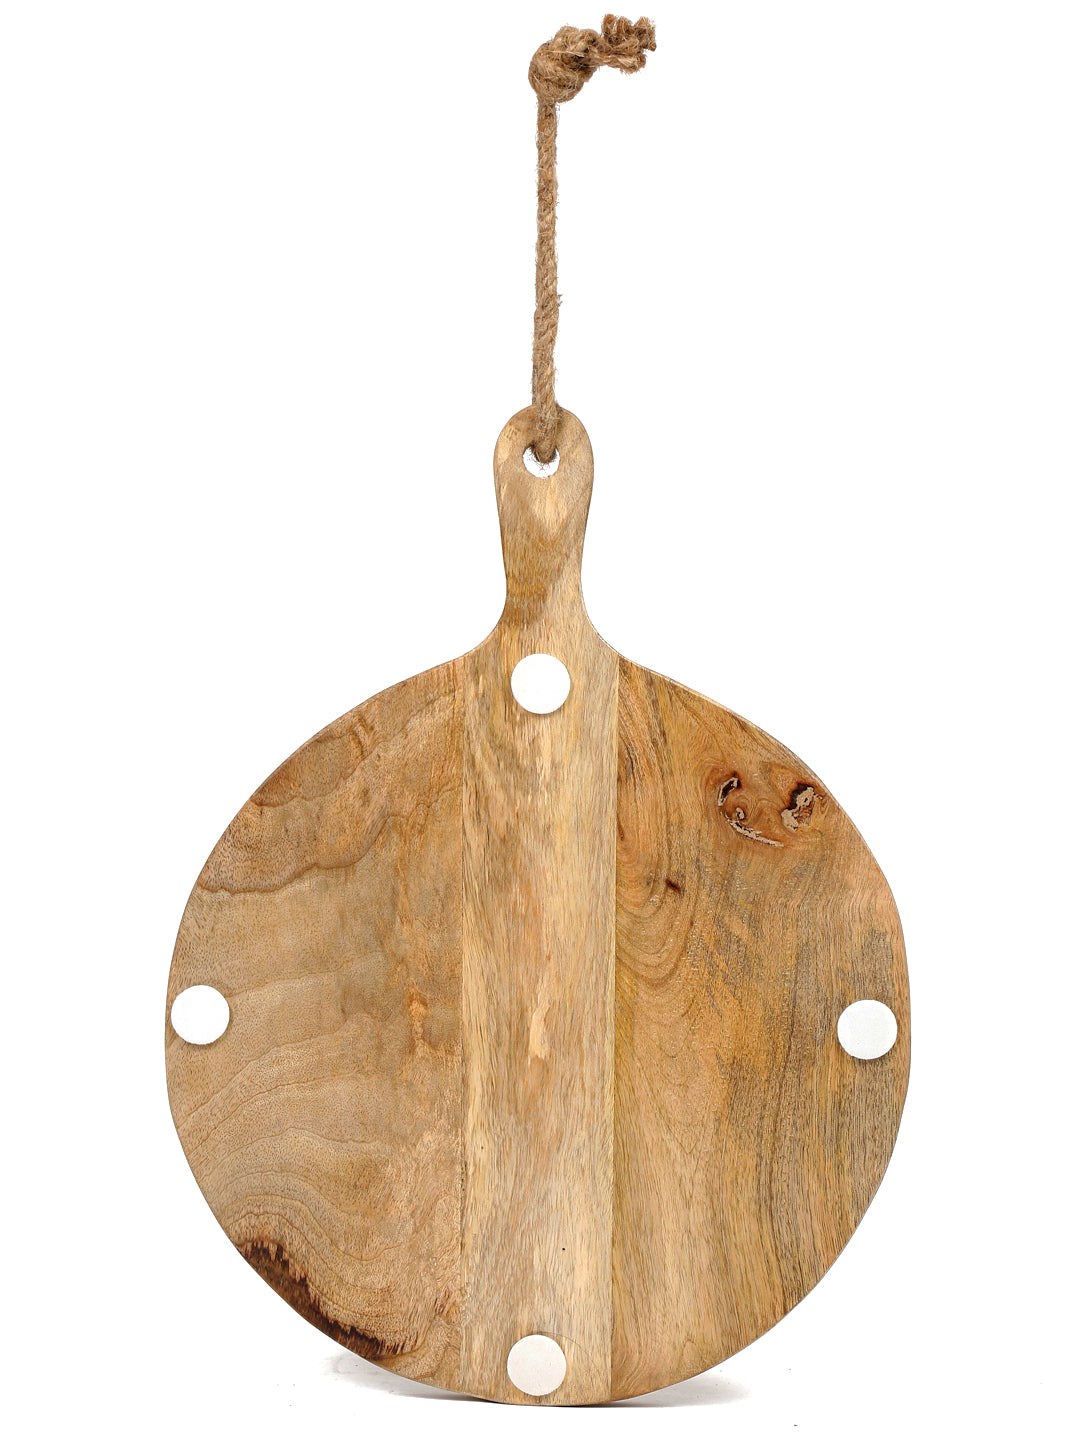 Large Round Wooden Chopping Board for Meal